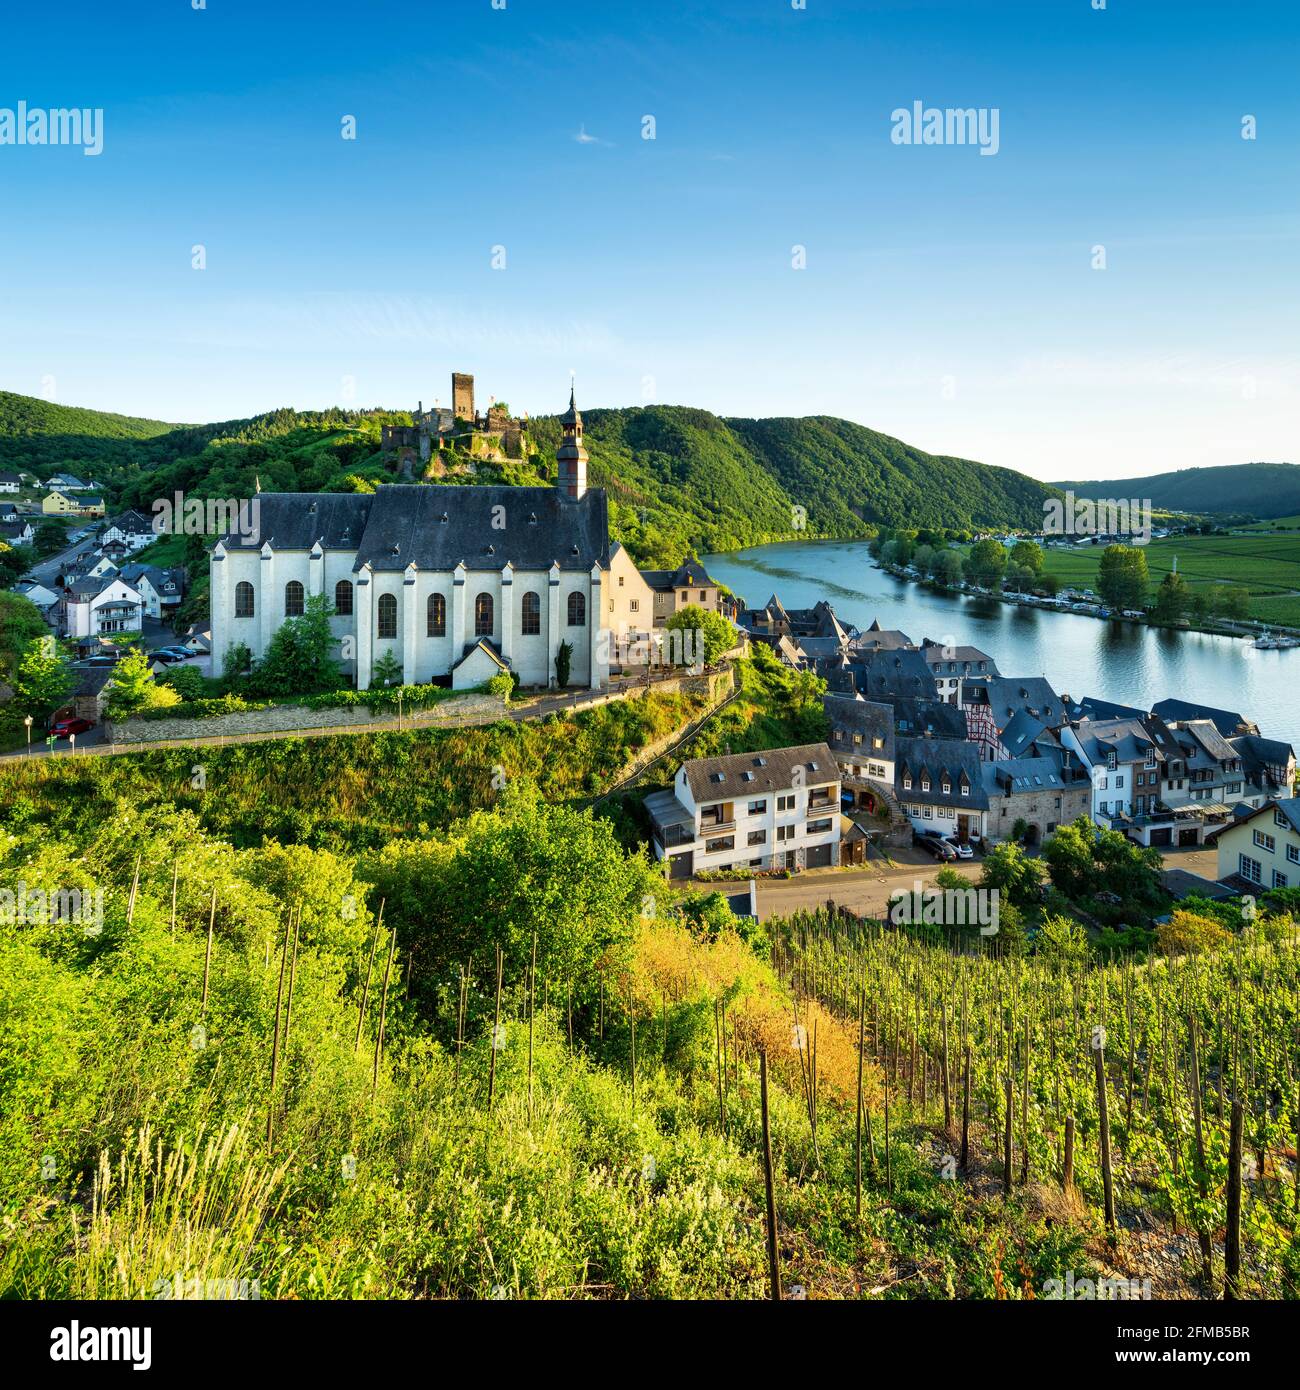 Germany, Rhineland-Palatinate, Beilstein (Mosel), view into the Moselle valley to the wine village of Beilstein with Carmelite Church, Beilstein castle ruins and vineyards Stock Photo